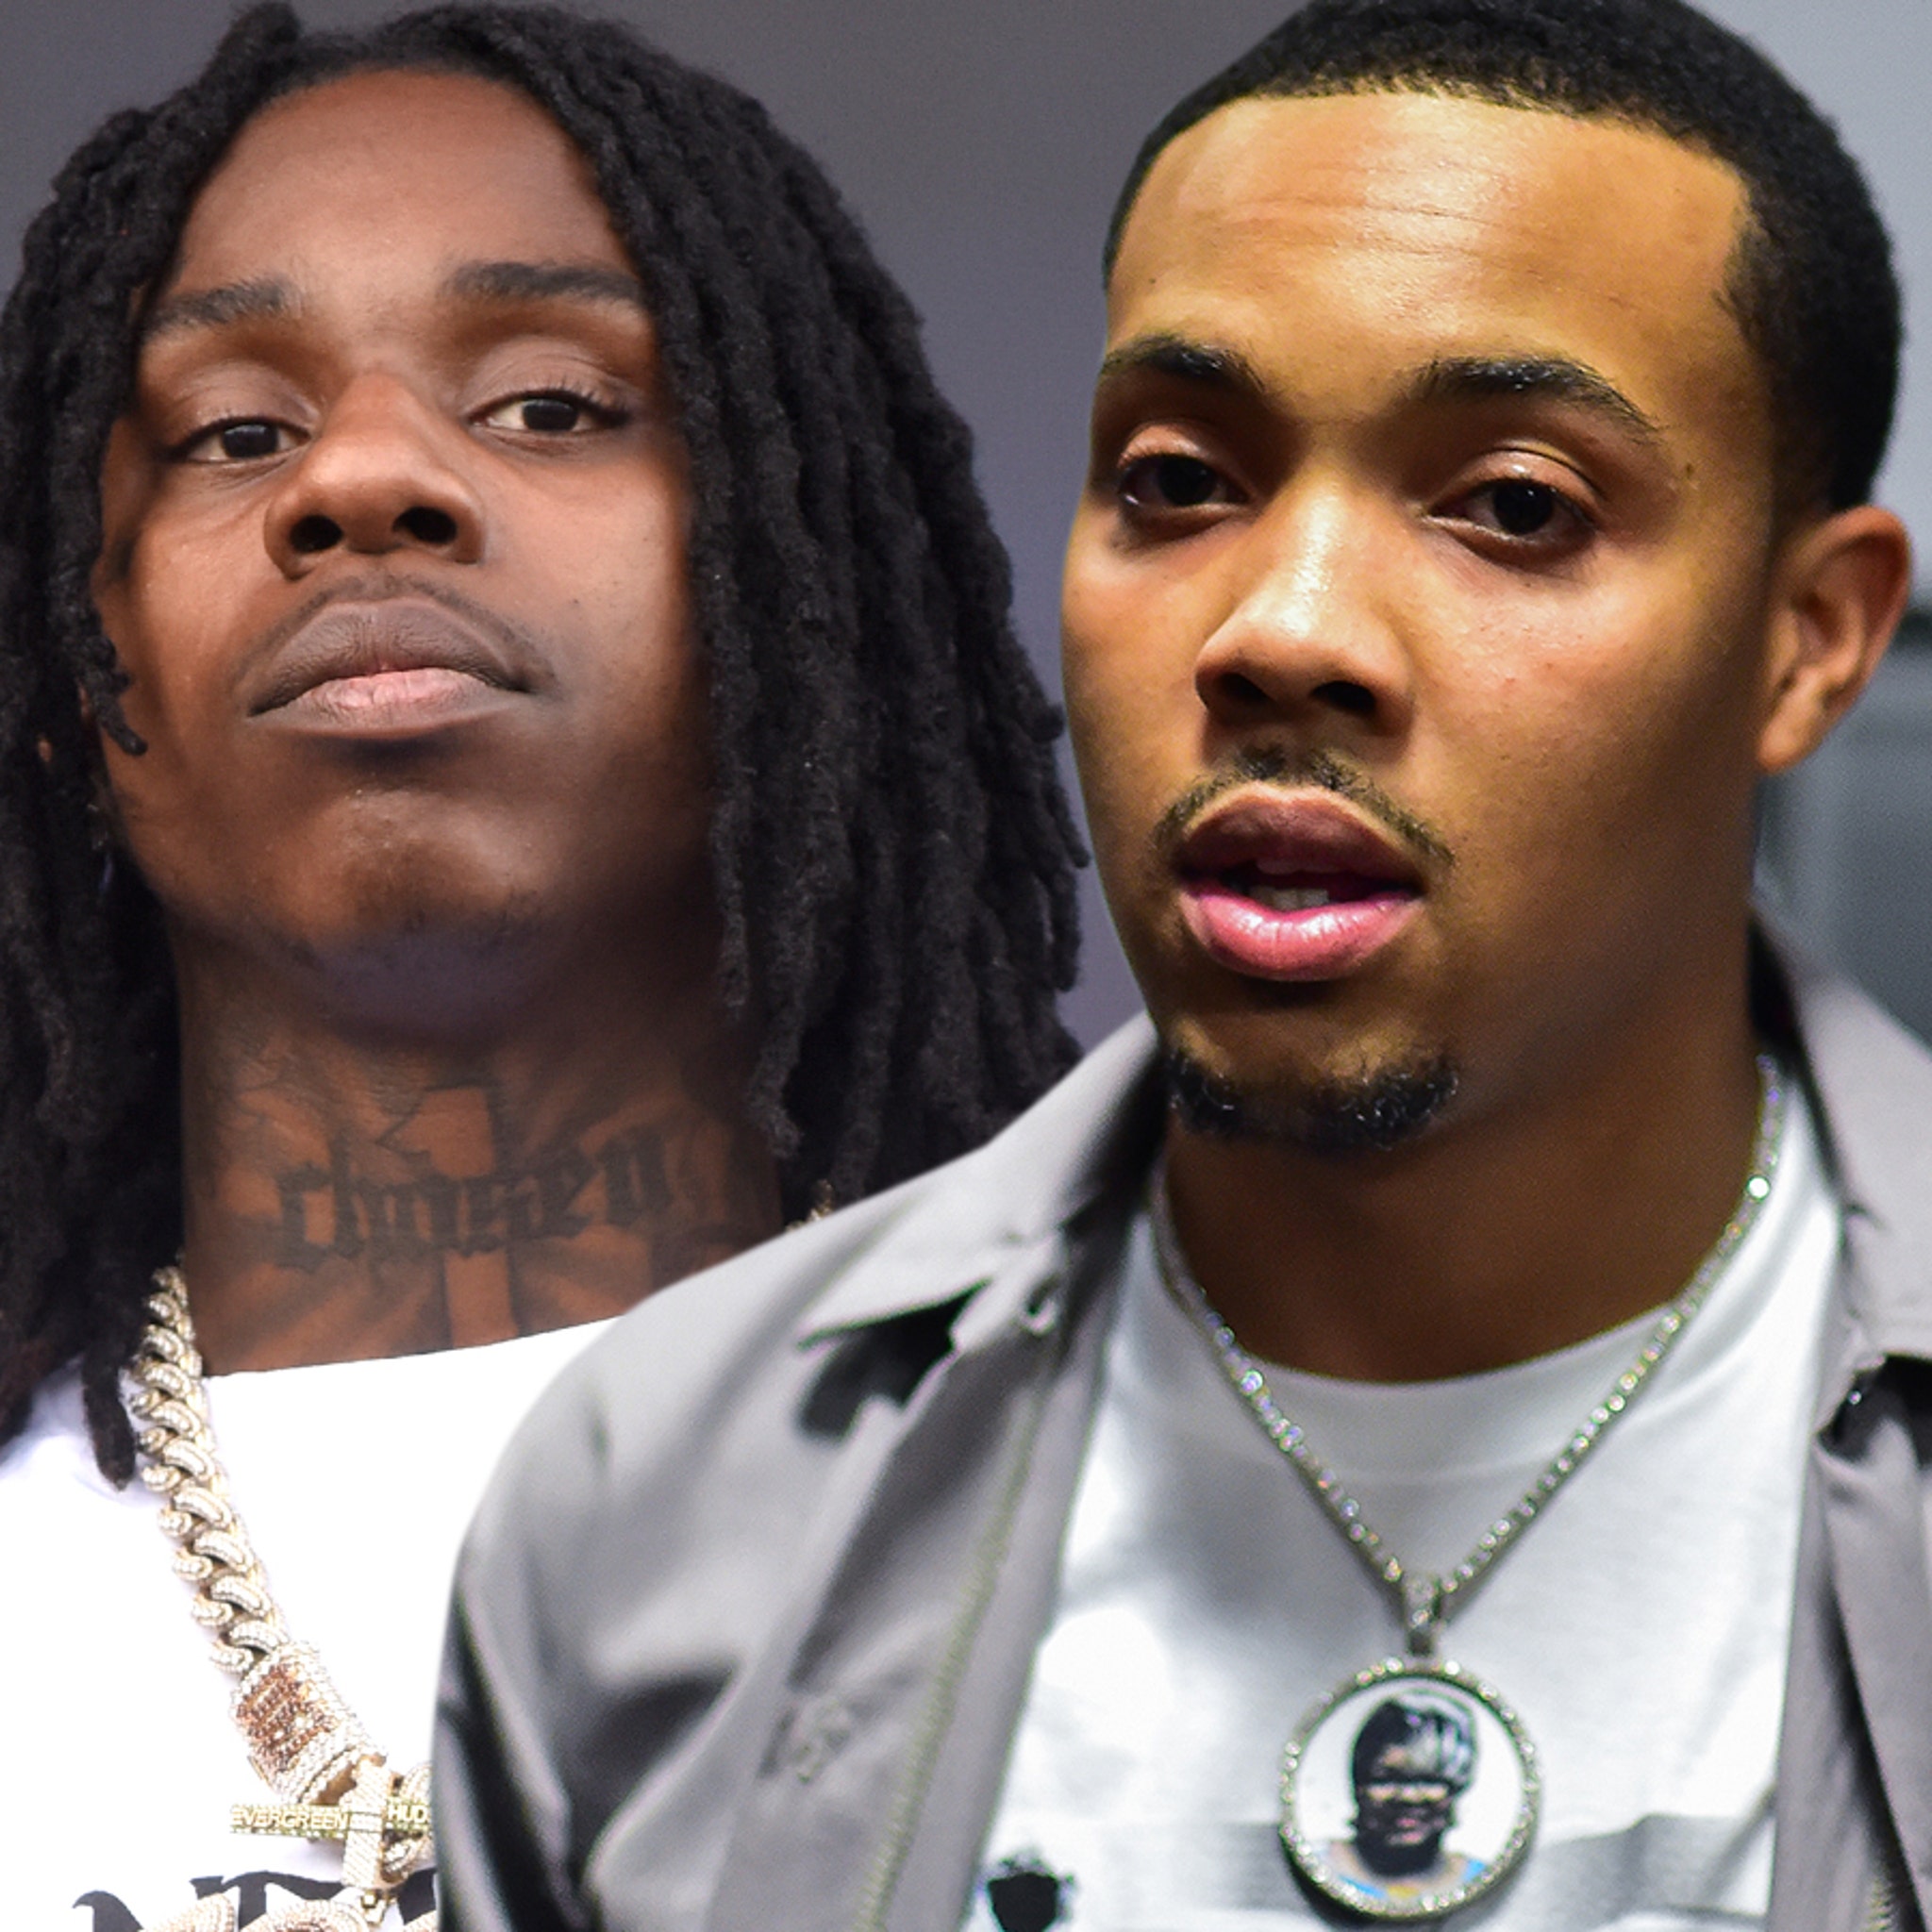 Conciërge licentie vredig Polo G and G Herbo Sued for $300K, Allegedly Torpedoed Tampa Rap Festival